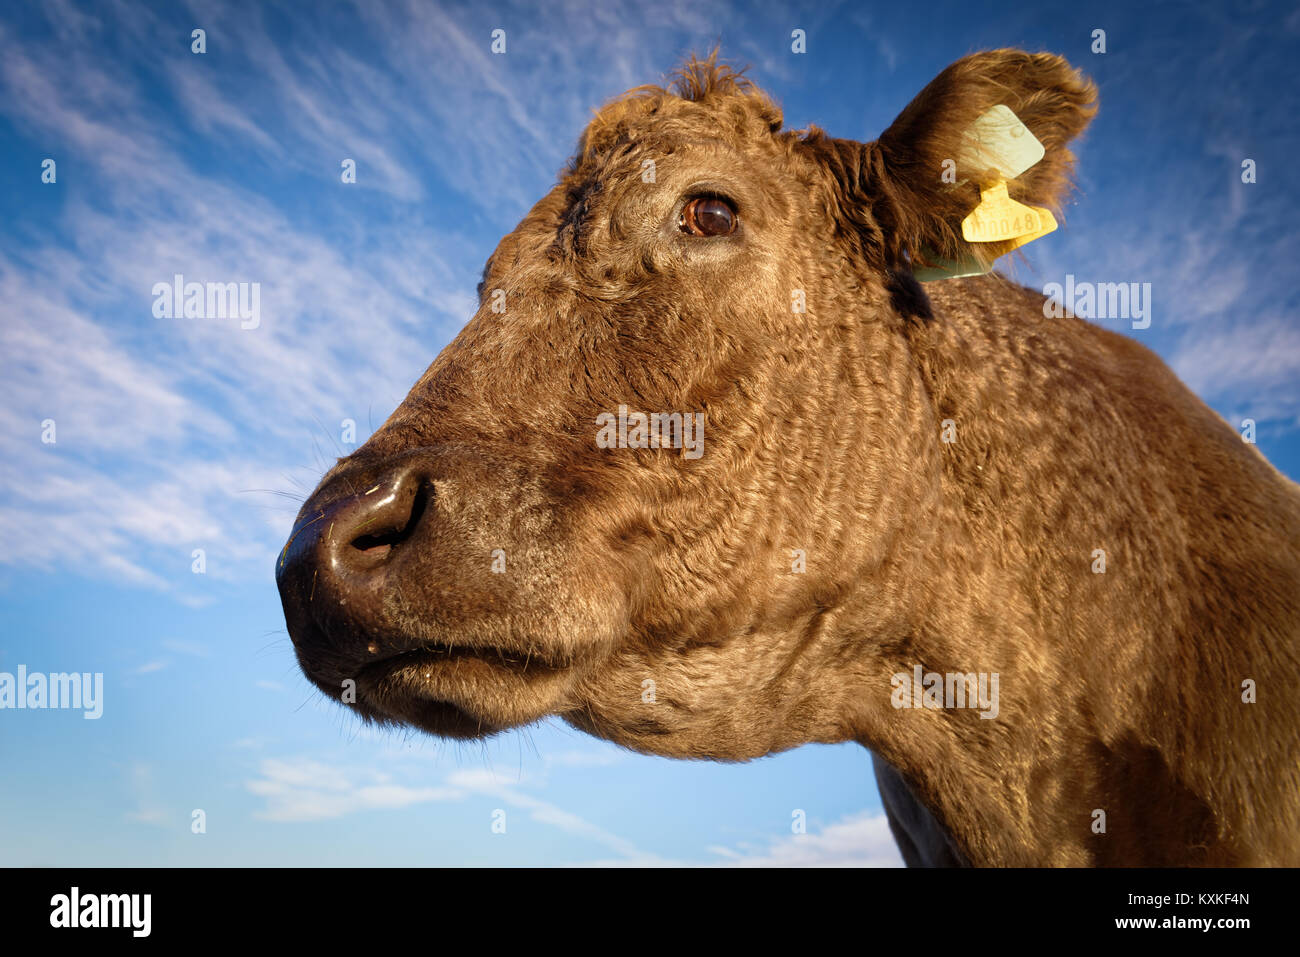 The head of a cow against a bright blue sky. Stock Photo